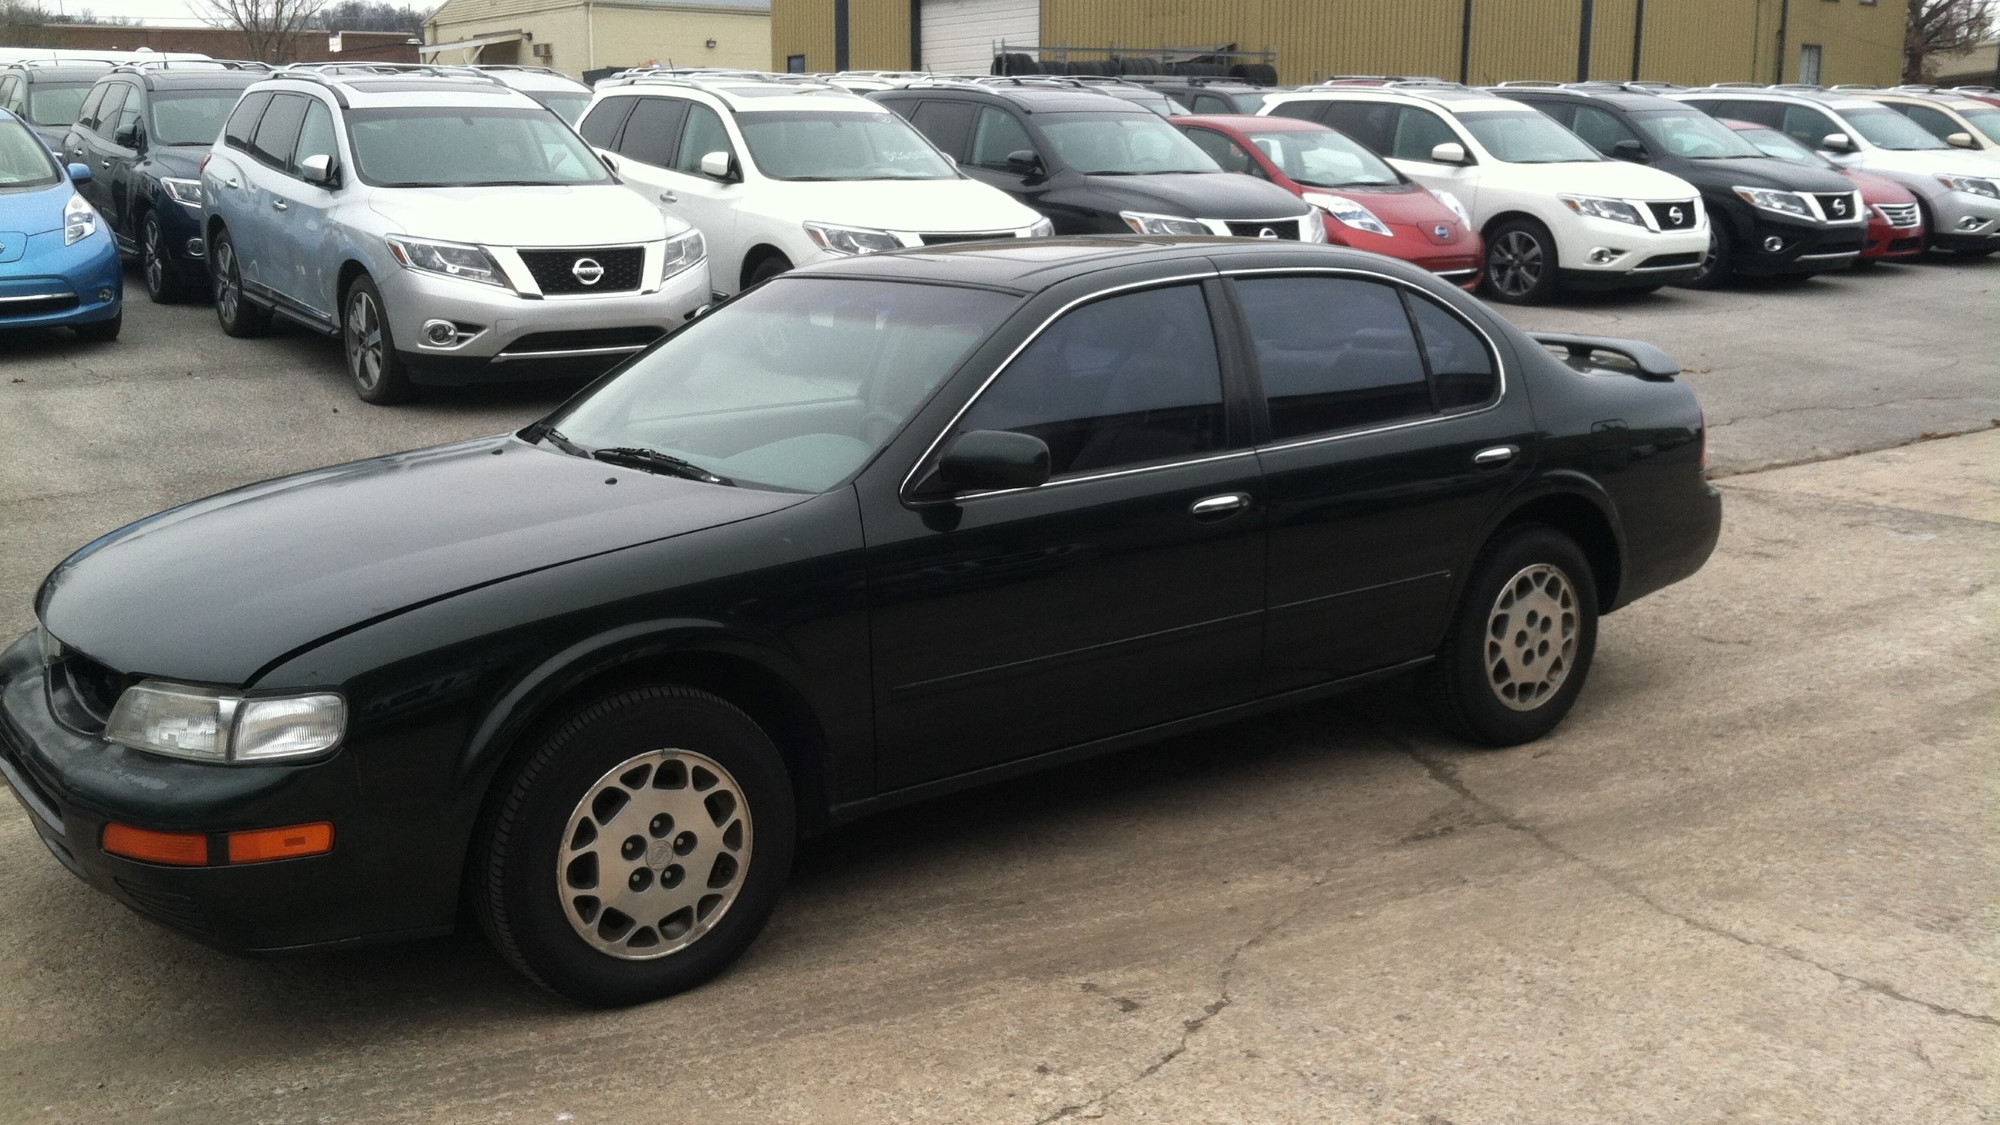 1996 Nissan Maxima from Craigslist ad at its new home in Nissan's U.S. headquarters